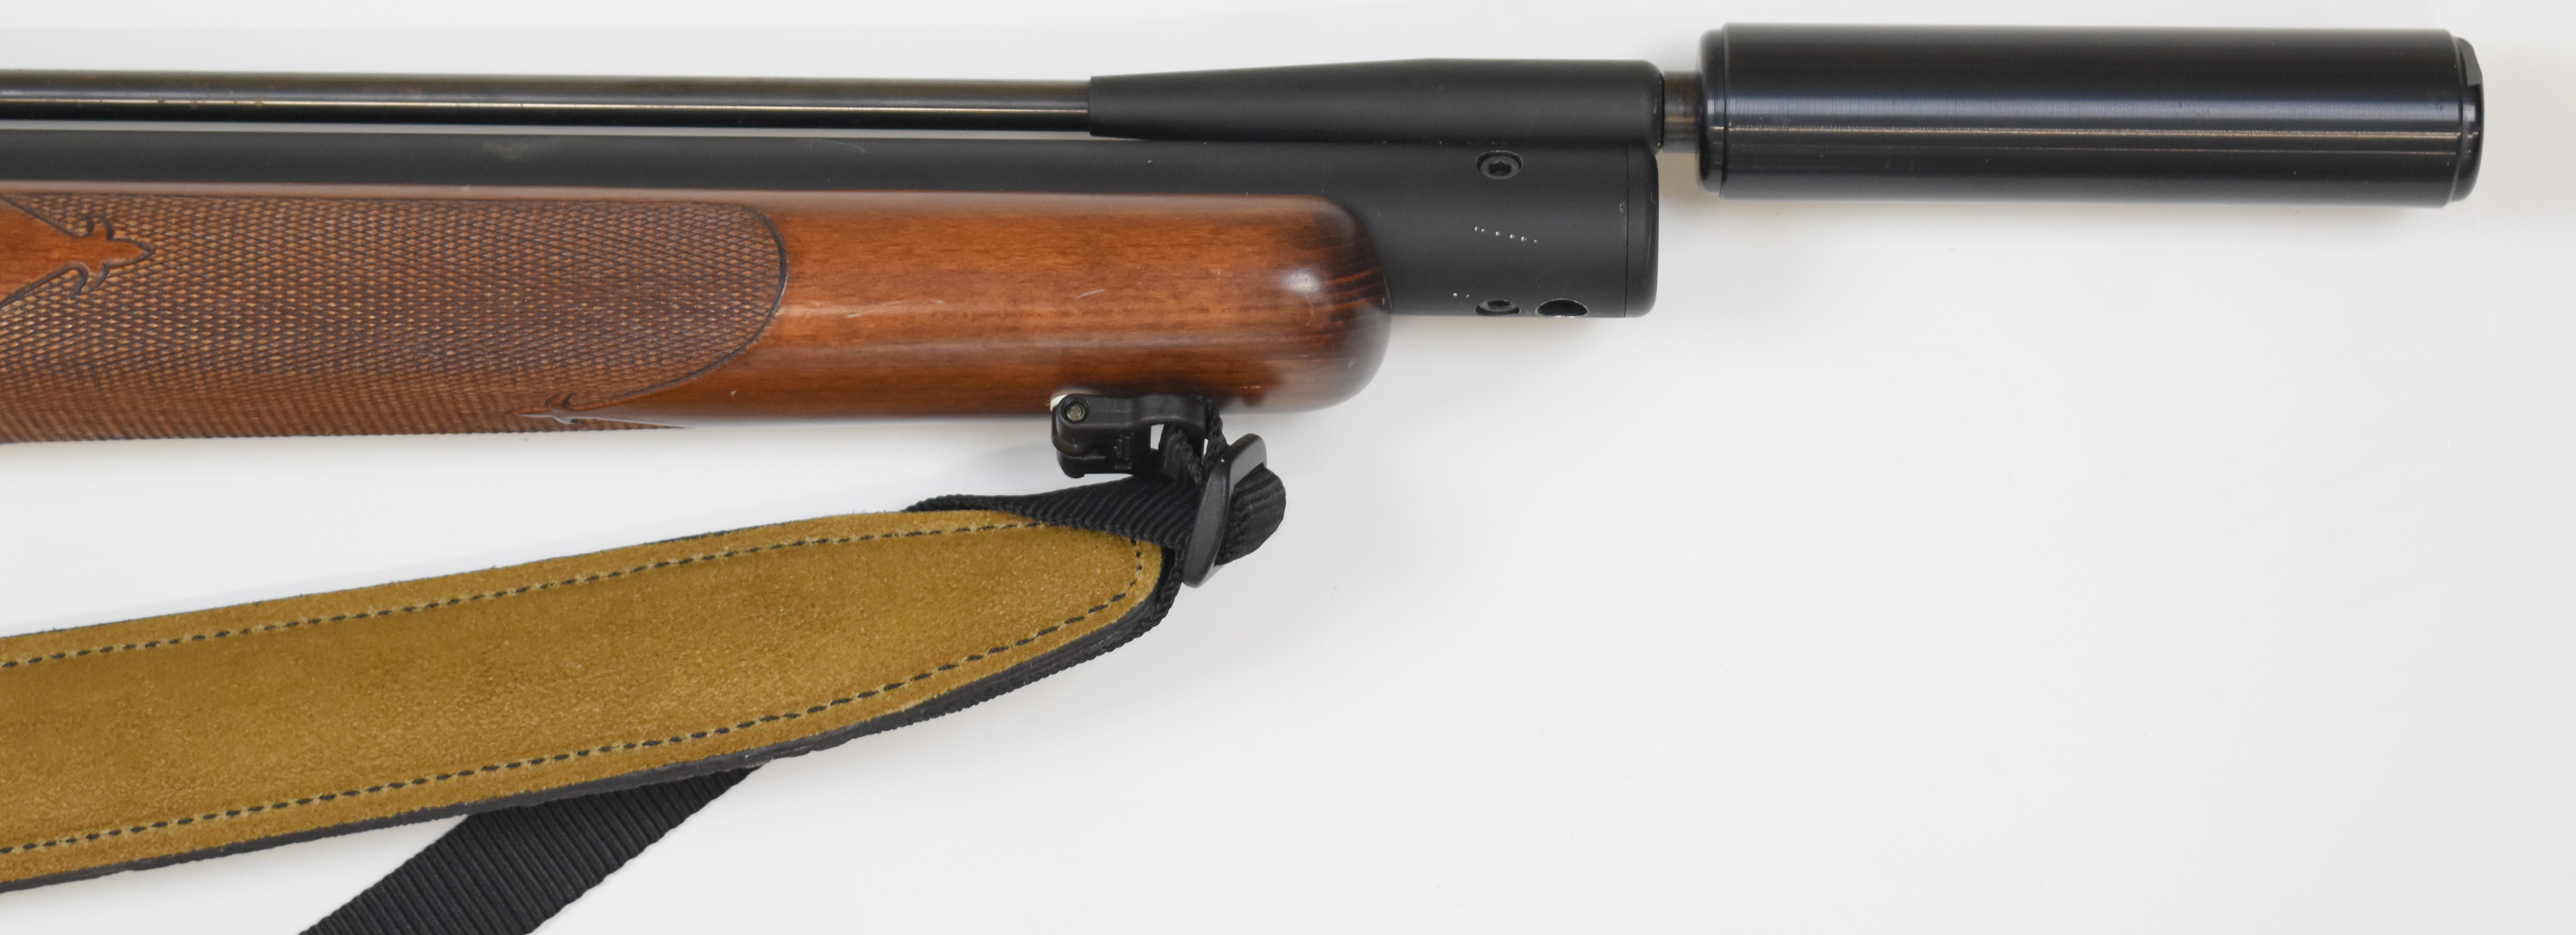 Webley Axsor .22 PCP air rifle with chequered semi-pistol grip and forend, raised cheek piece, - Image 5 of 20